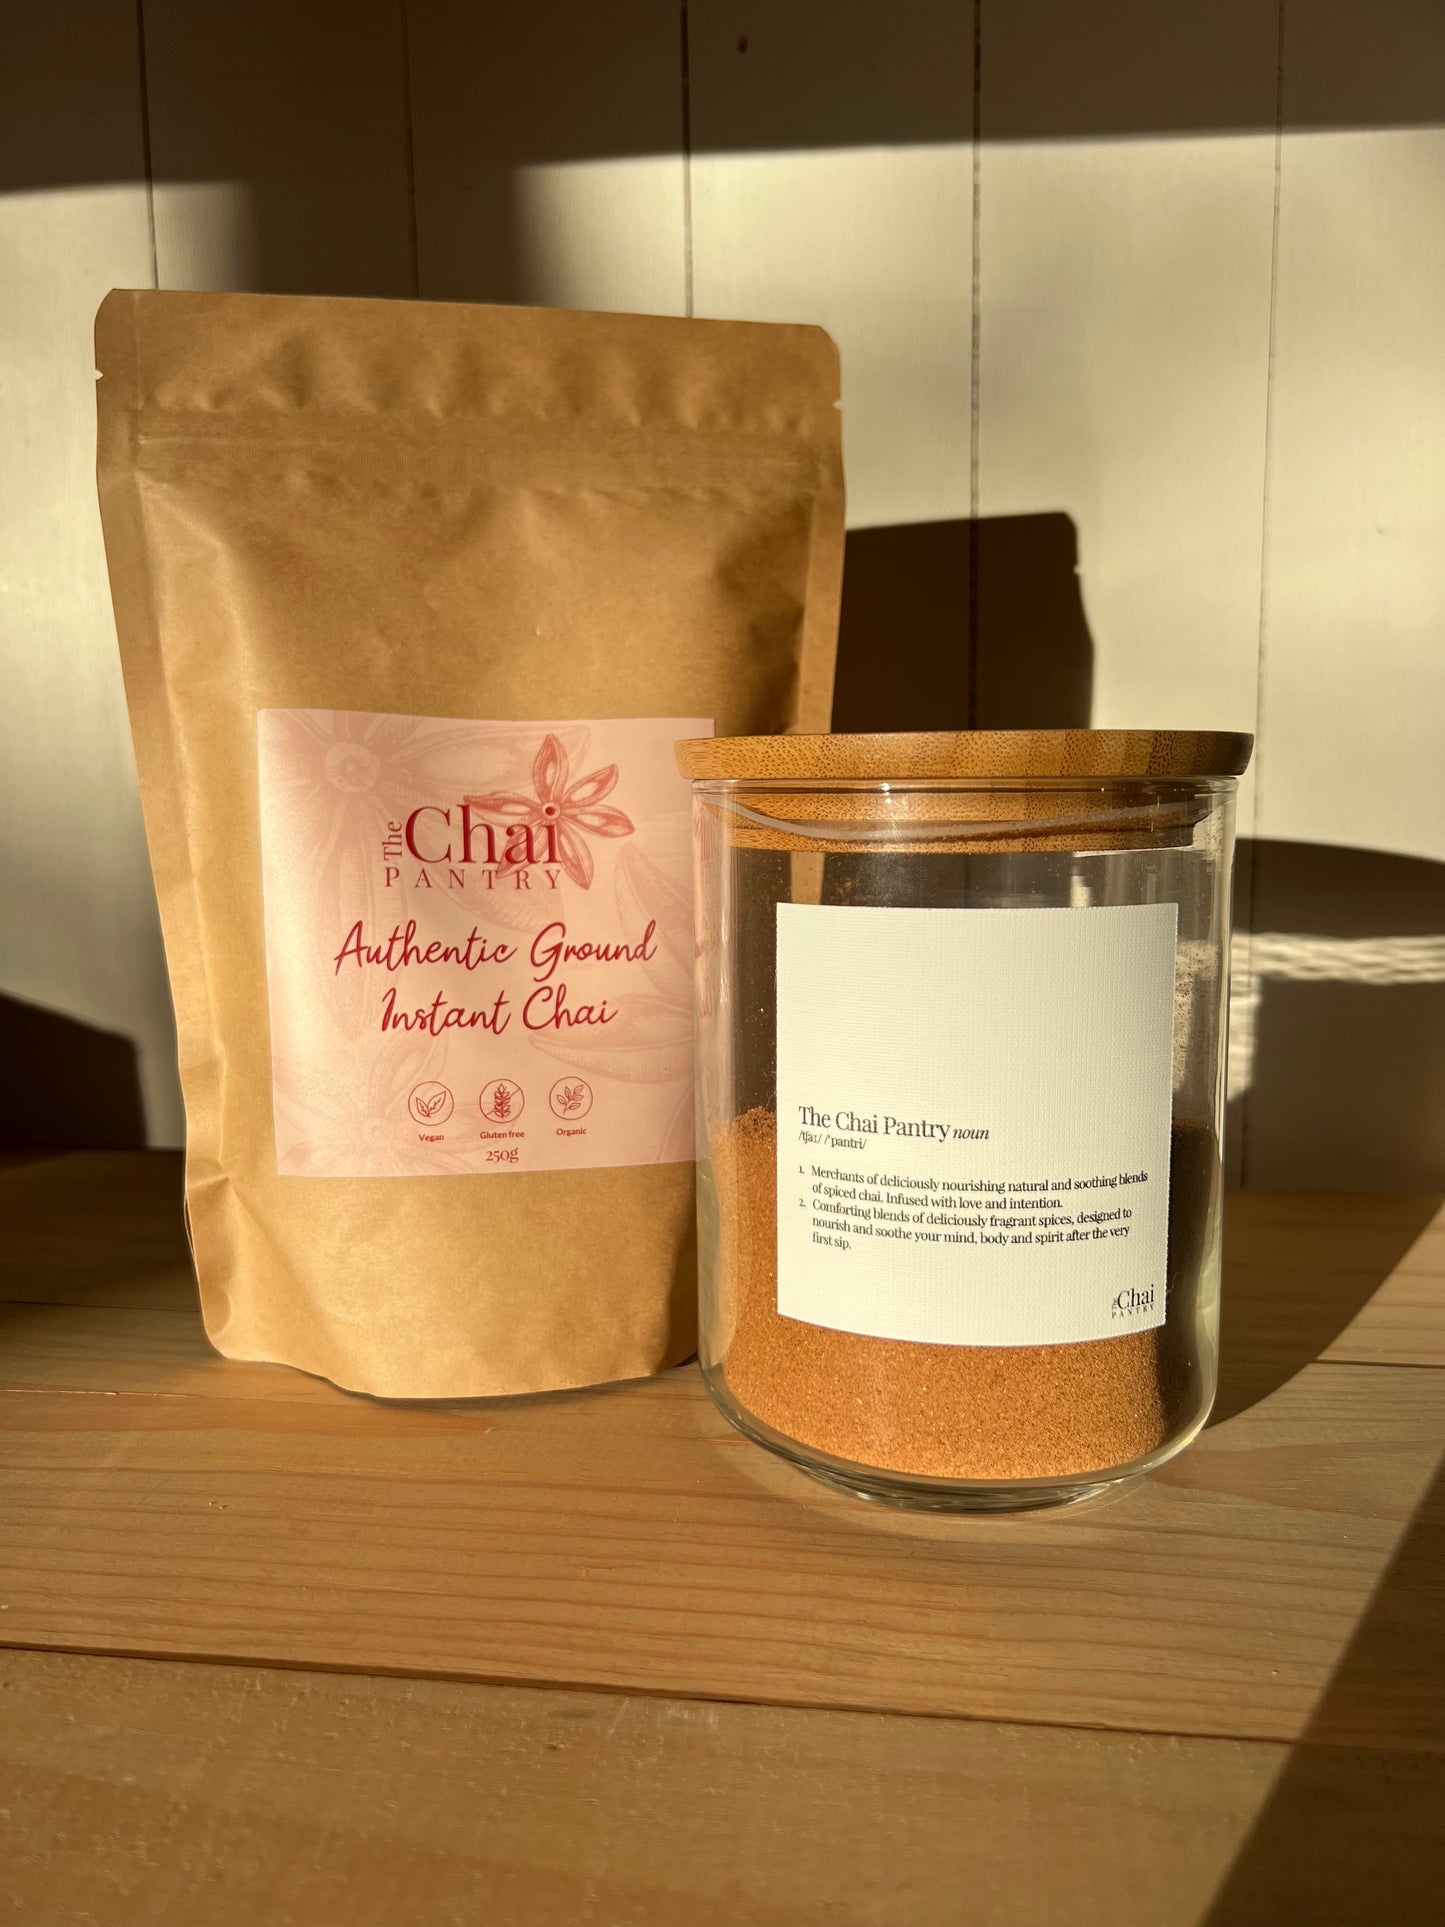 The Chai Pantry Canister